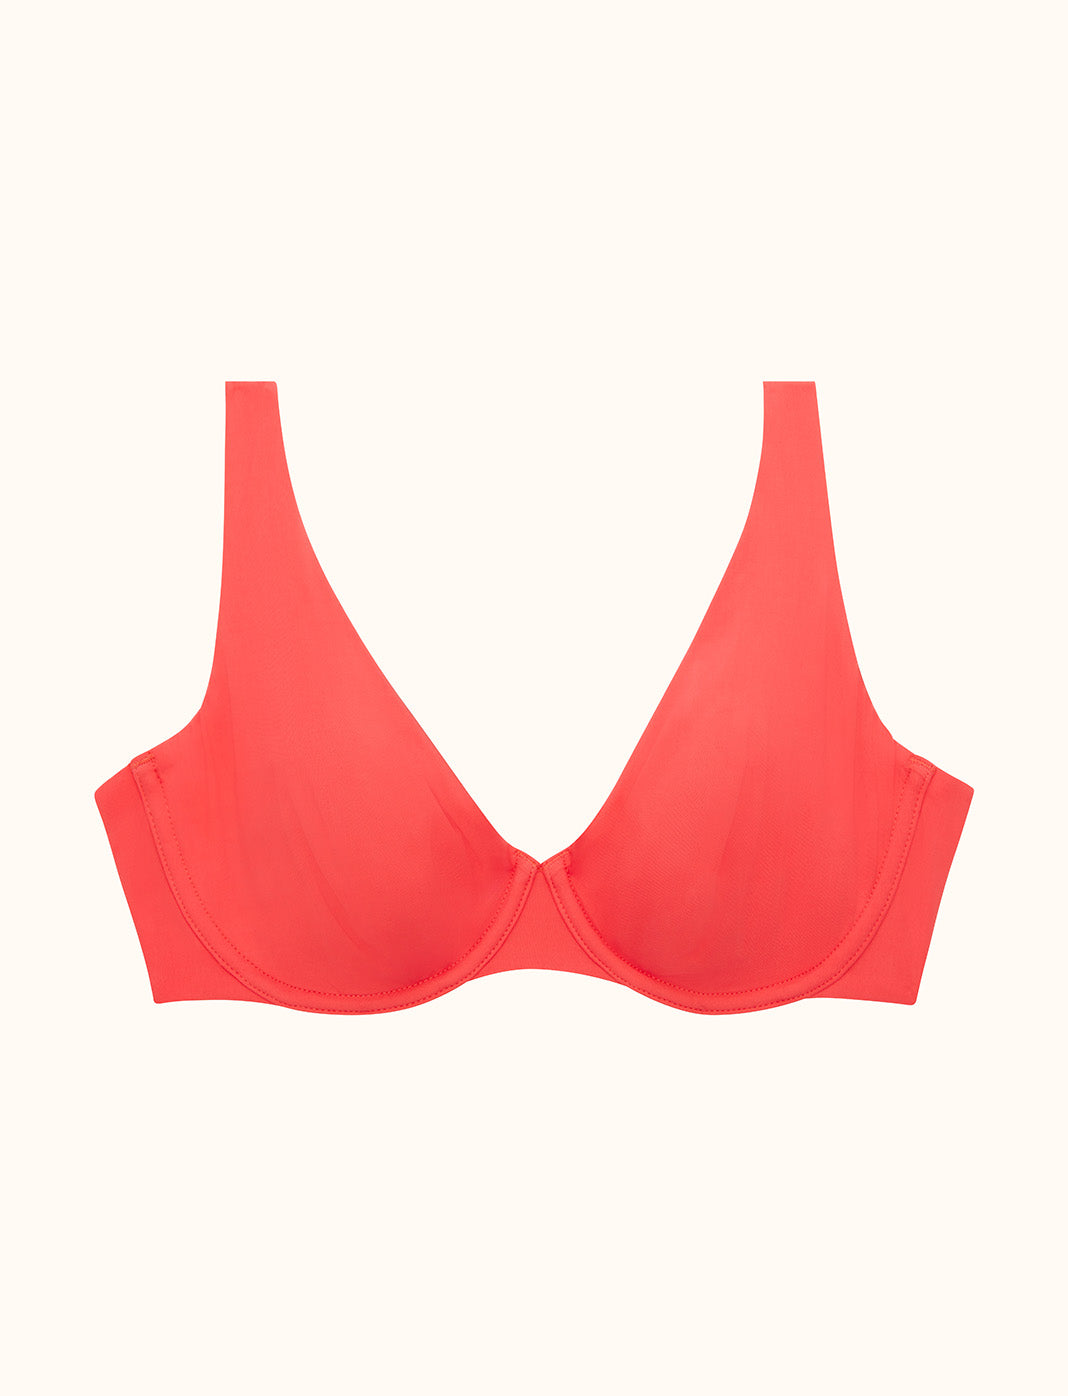 Trylo SUPERFIT 32 OLIVEGREEN D - CUP Women Full Coverage Non Padded Bra -  Buy Trylo SUPERFIT 32 OLIVEGREEN D - CUP Women Full Coverage Non Padded Bra  Online at Best Prices in India